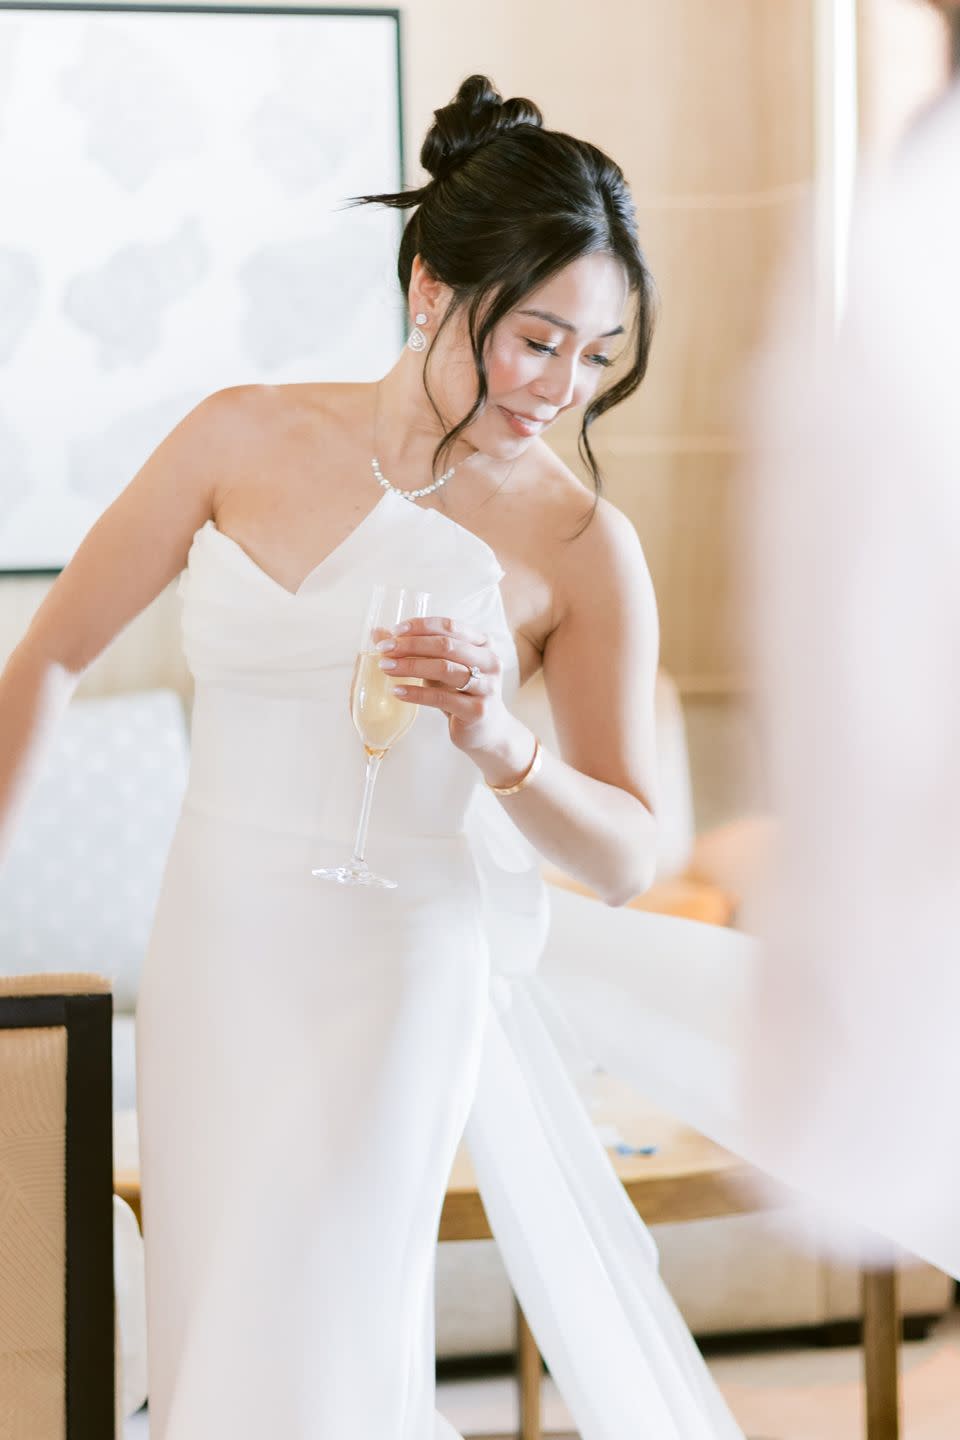 a person in a white dress holding a glass of wine